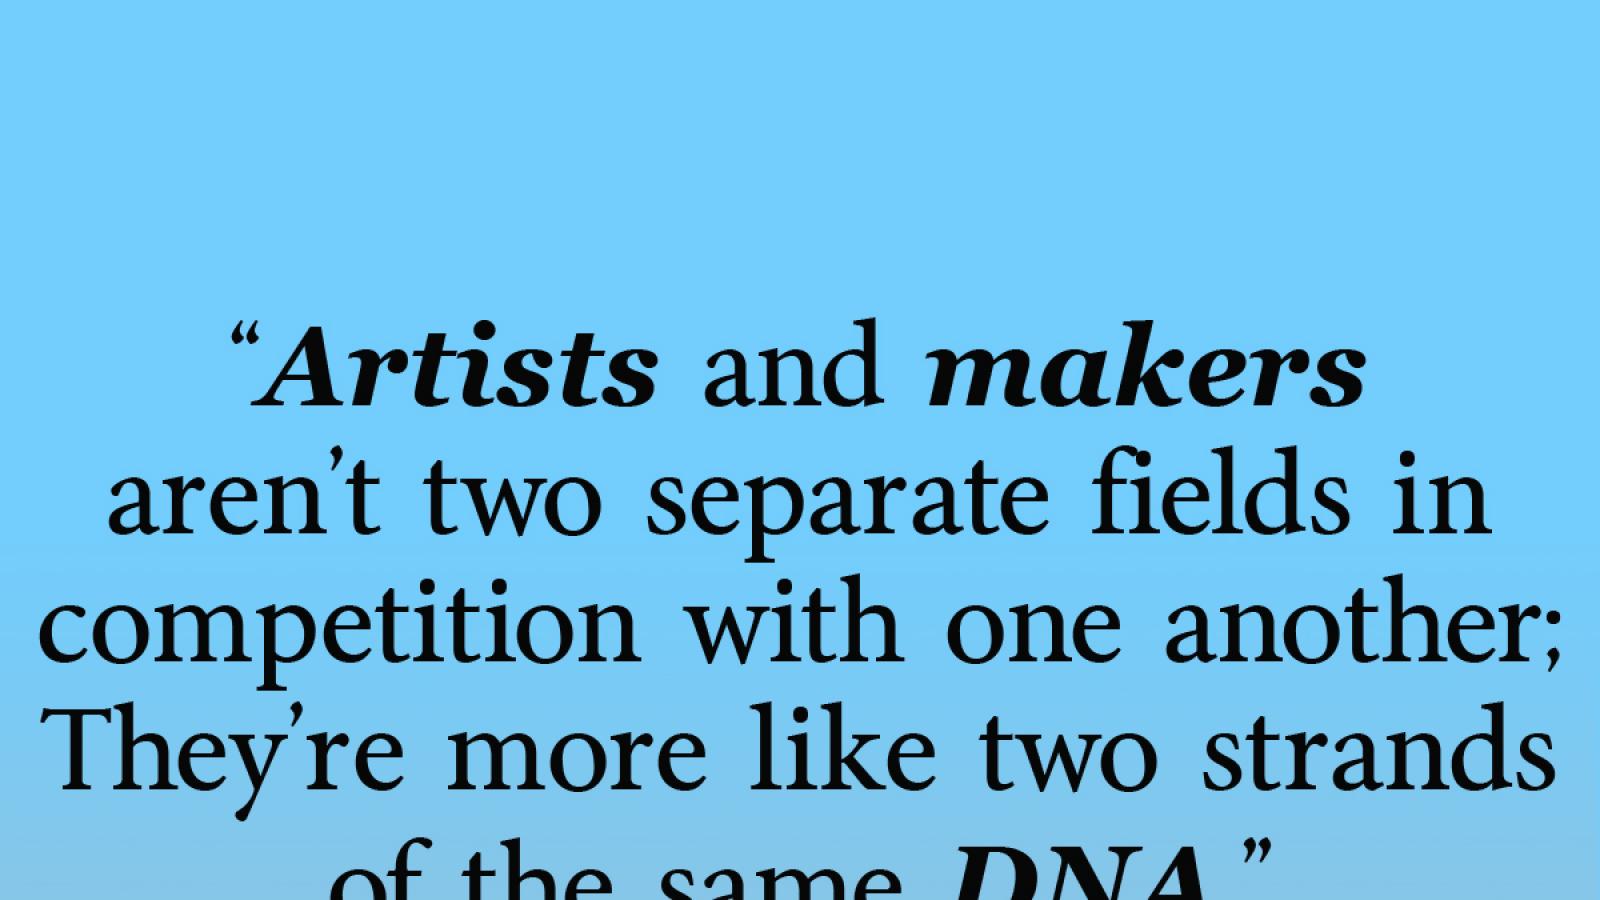 Quote from Jane Chu, "Artists and makers aren’t two separate fields in competition with one another; They’re more like two strands of the same DNA." 